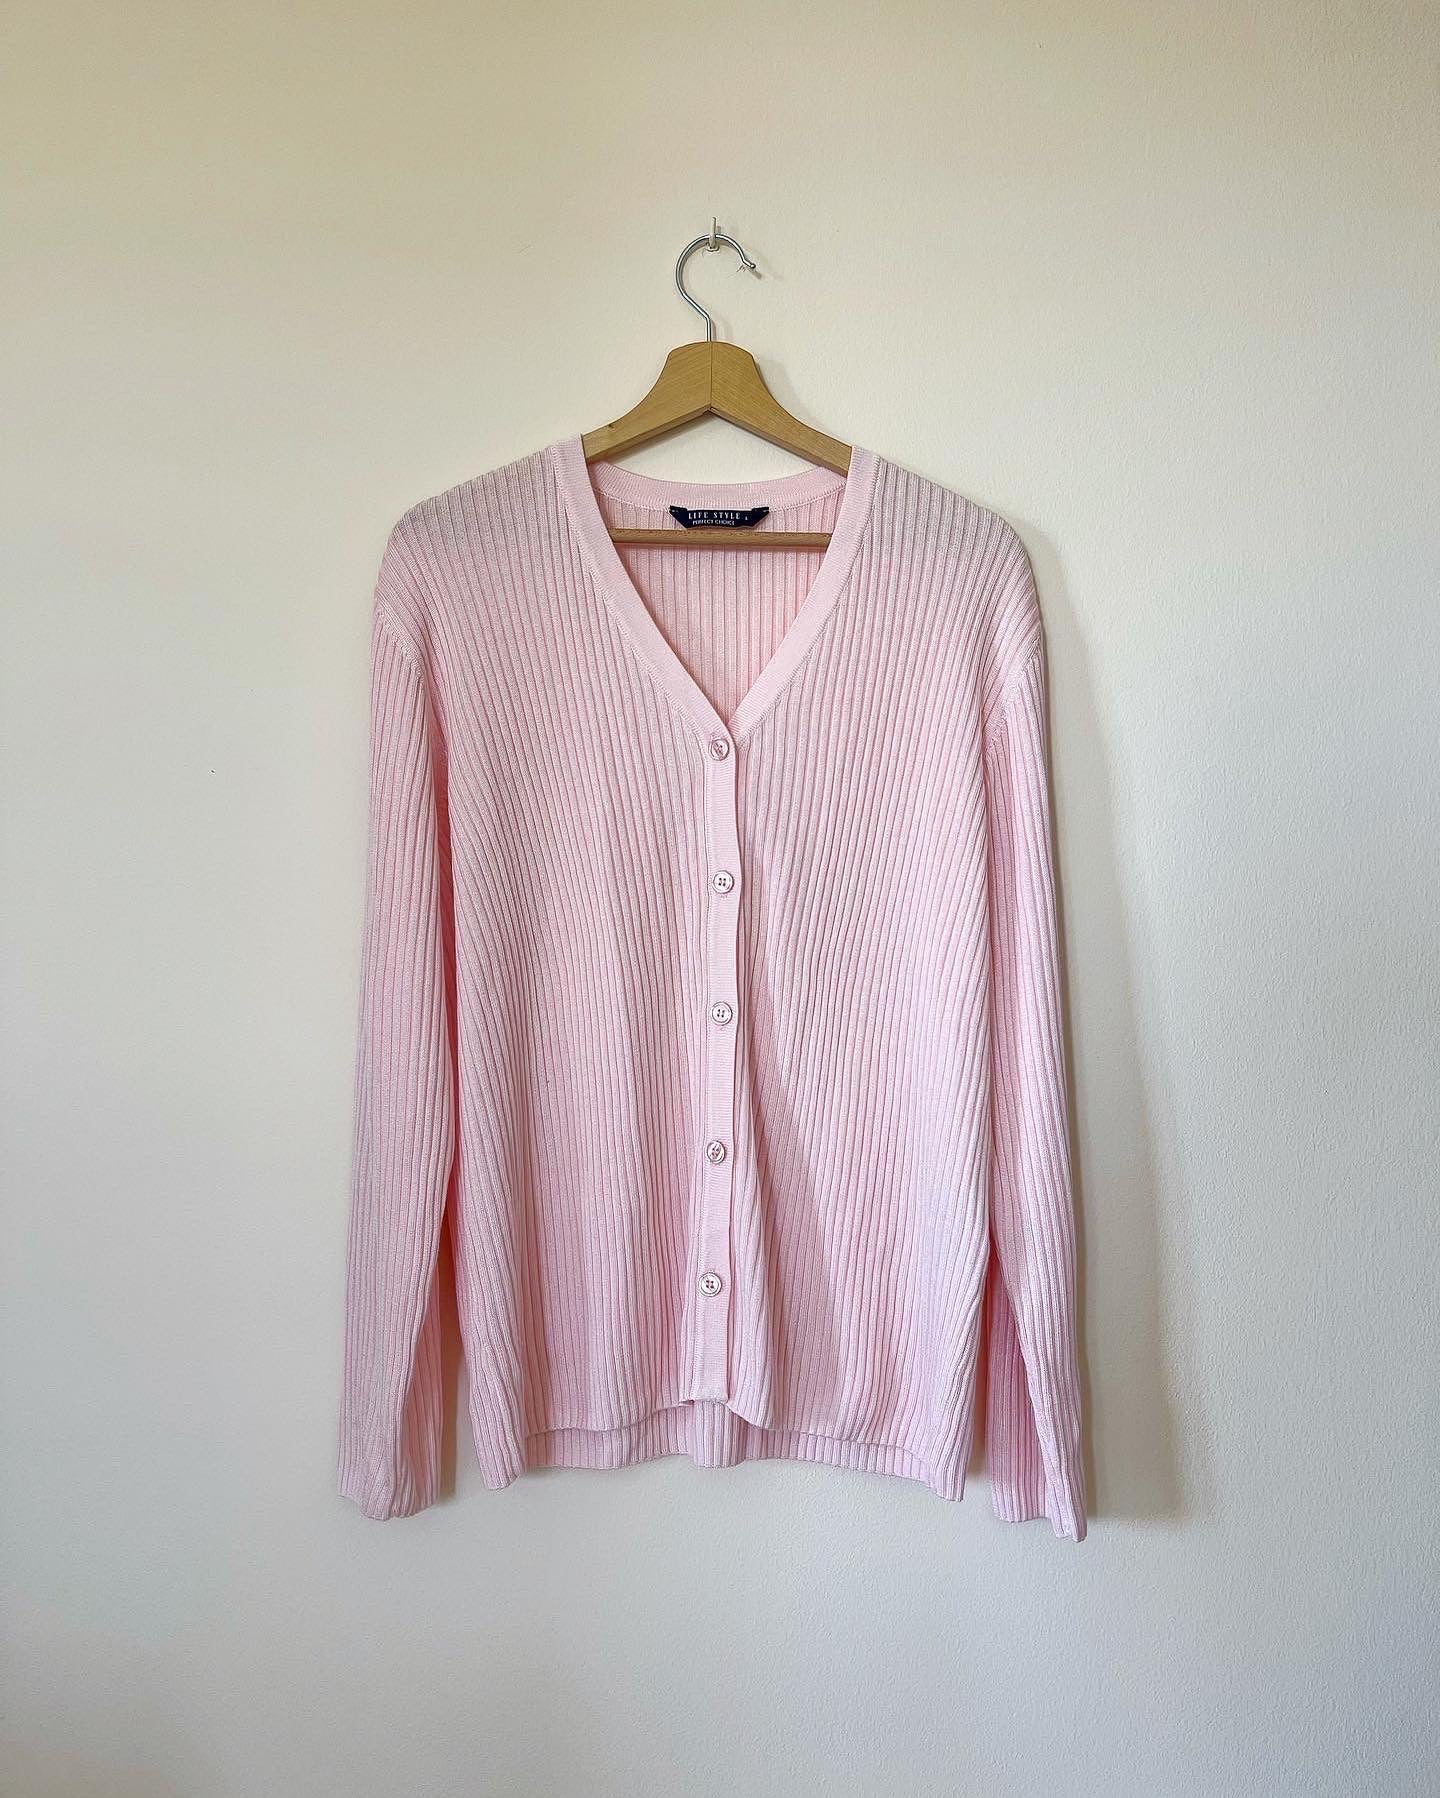 Lovely vintage cardigan in baby pink color